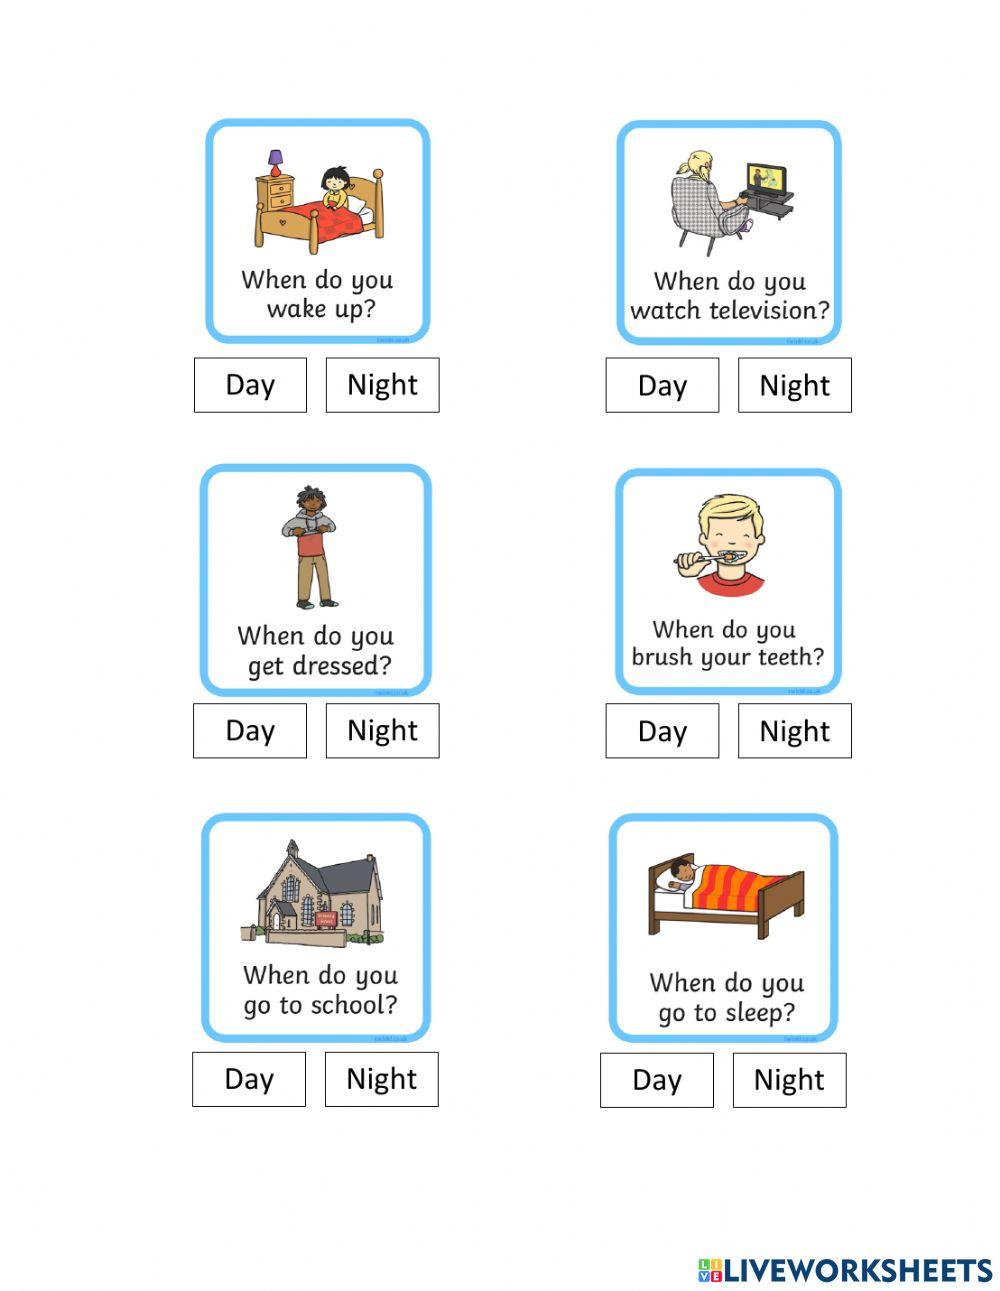 Day and Night Worksheet